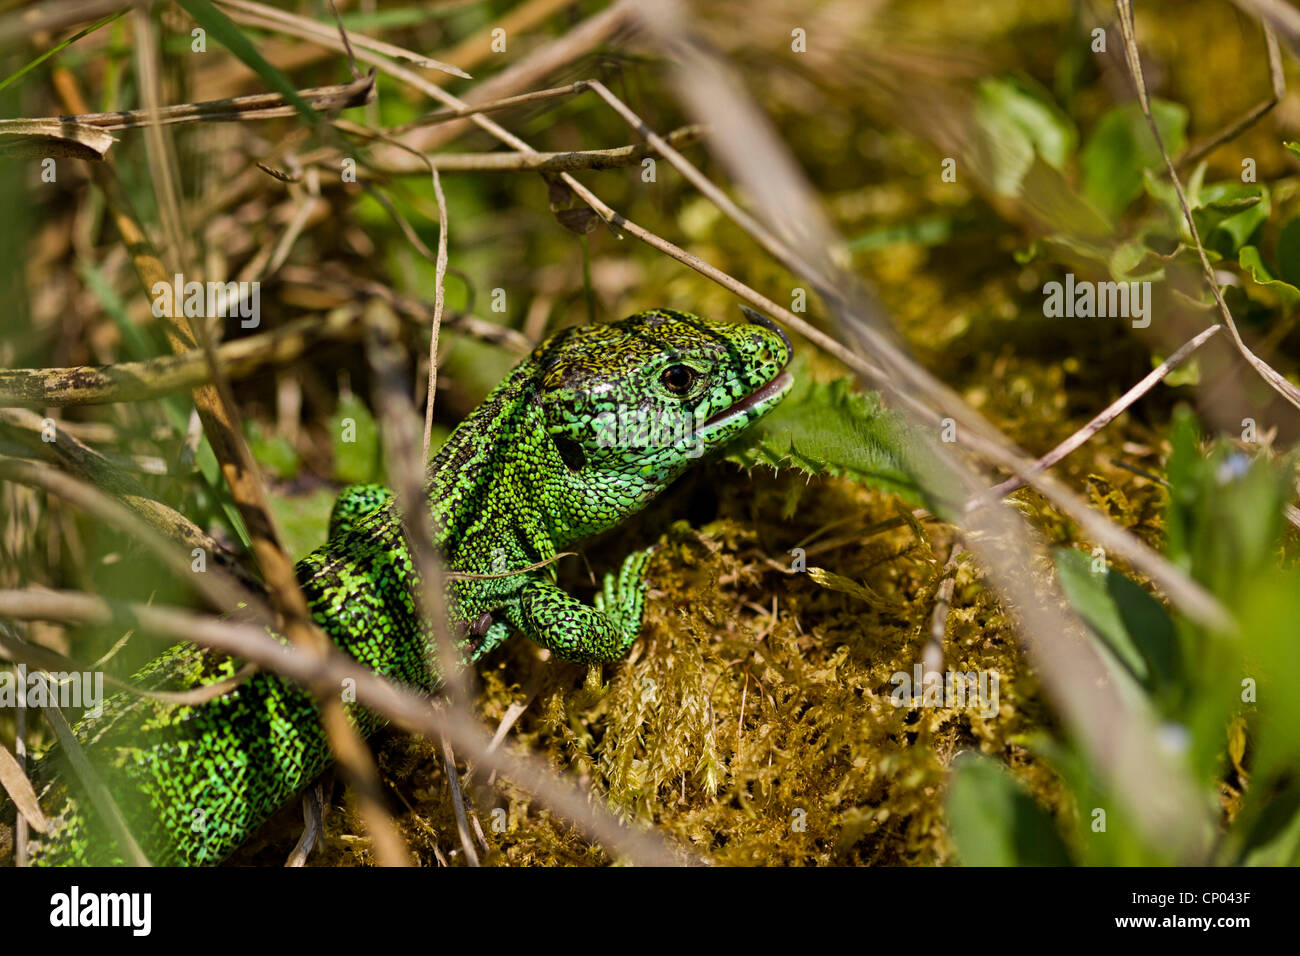 sand lizard (Lacerta agilis), male on a tuft of moss surrounded by grass halms, Germany, Baden-Wuerttemberg Stock Photo